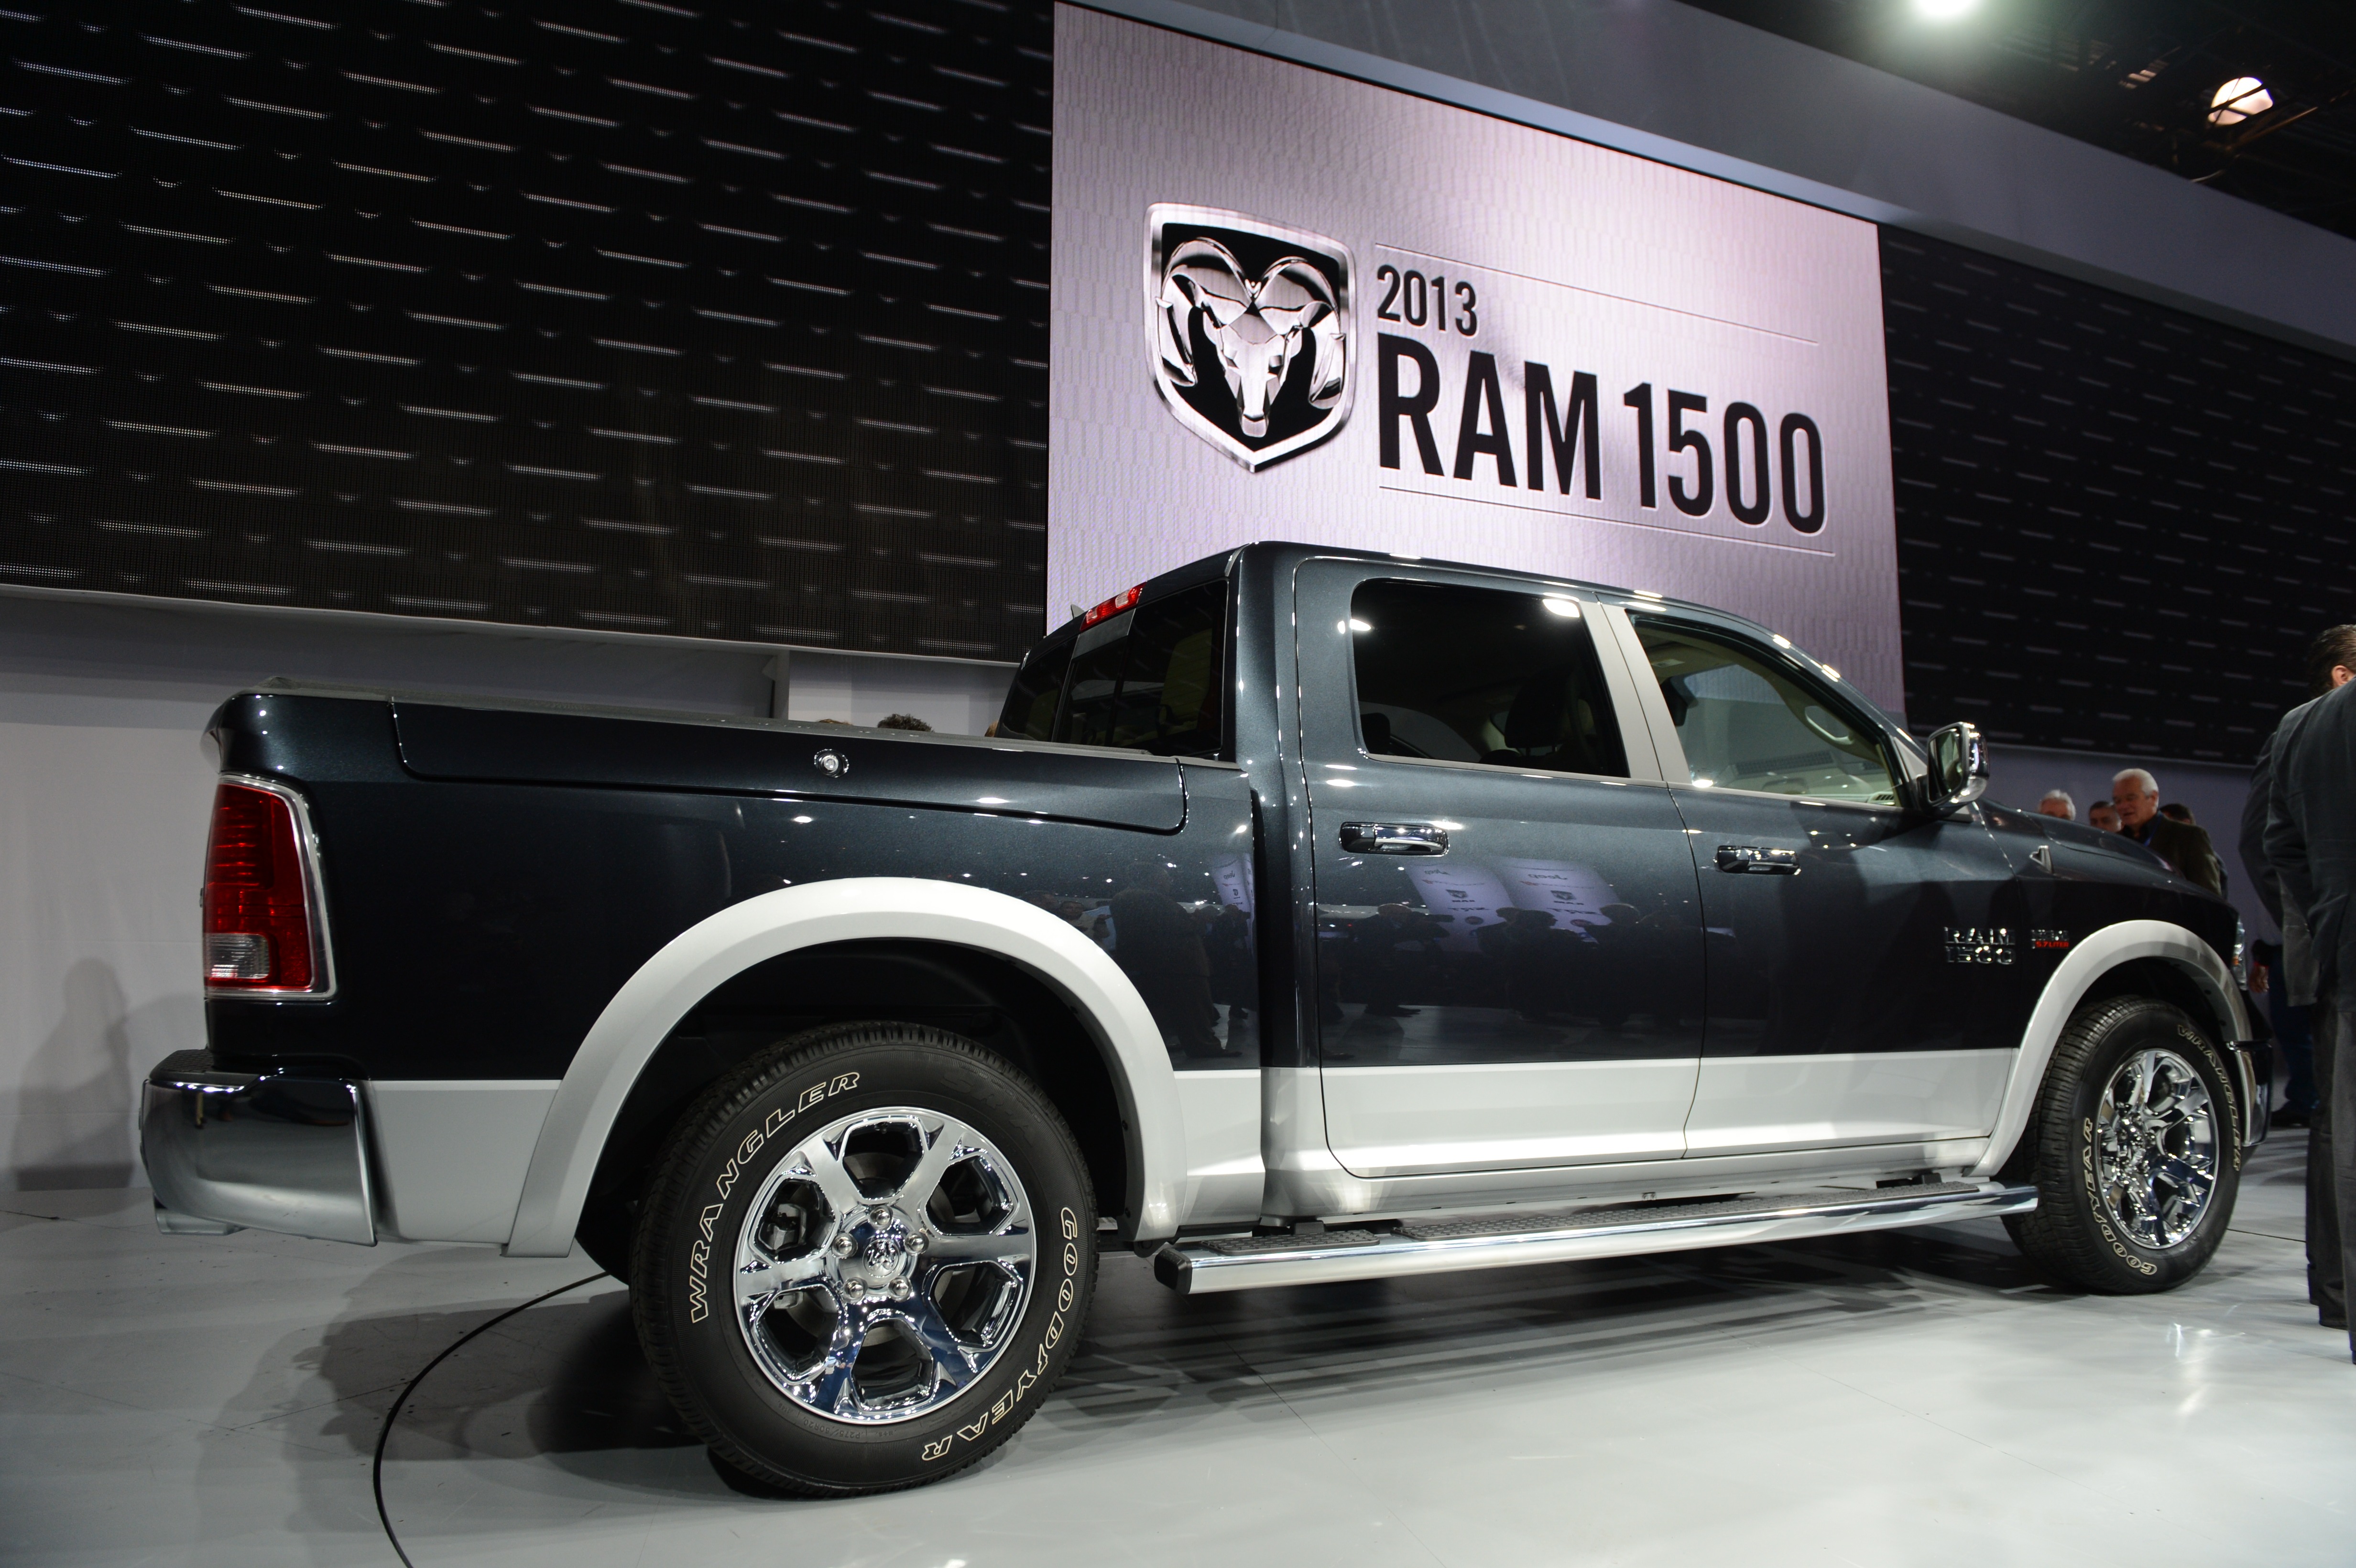 The 2013 Dodge Ram 1500 is introduced du